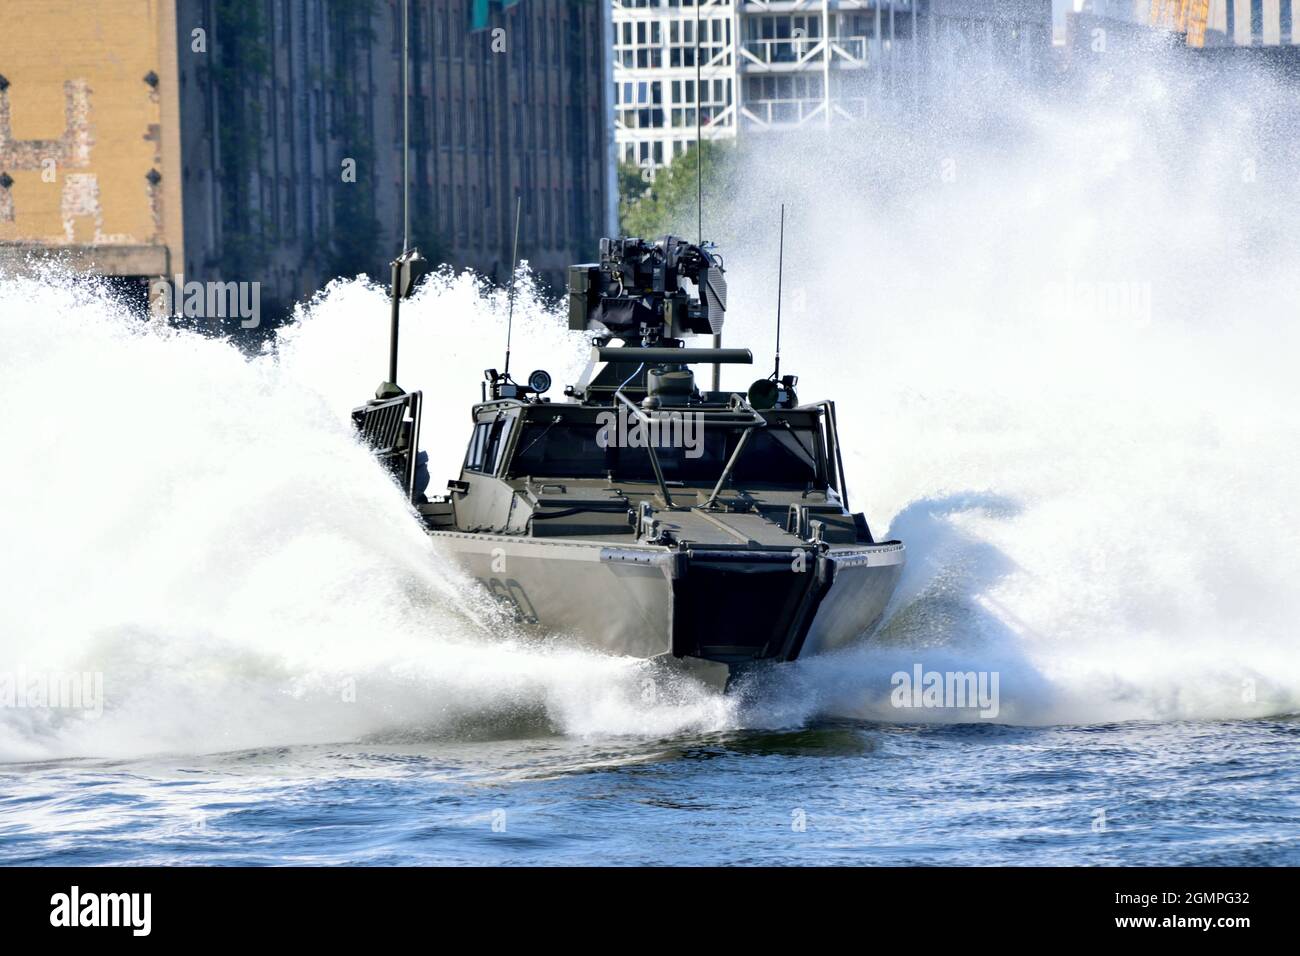 Swedish Navy CB90 NG patrol boat undertaking hard and fast maneuvering in Royal Victoria Dock in London as part of DSEI 2021 event Stock Photo